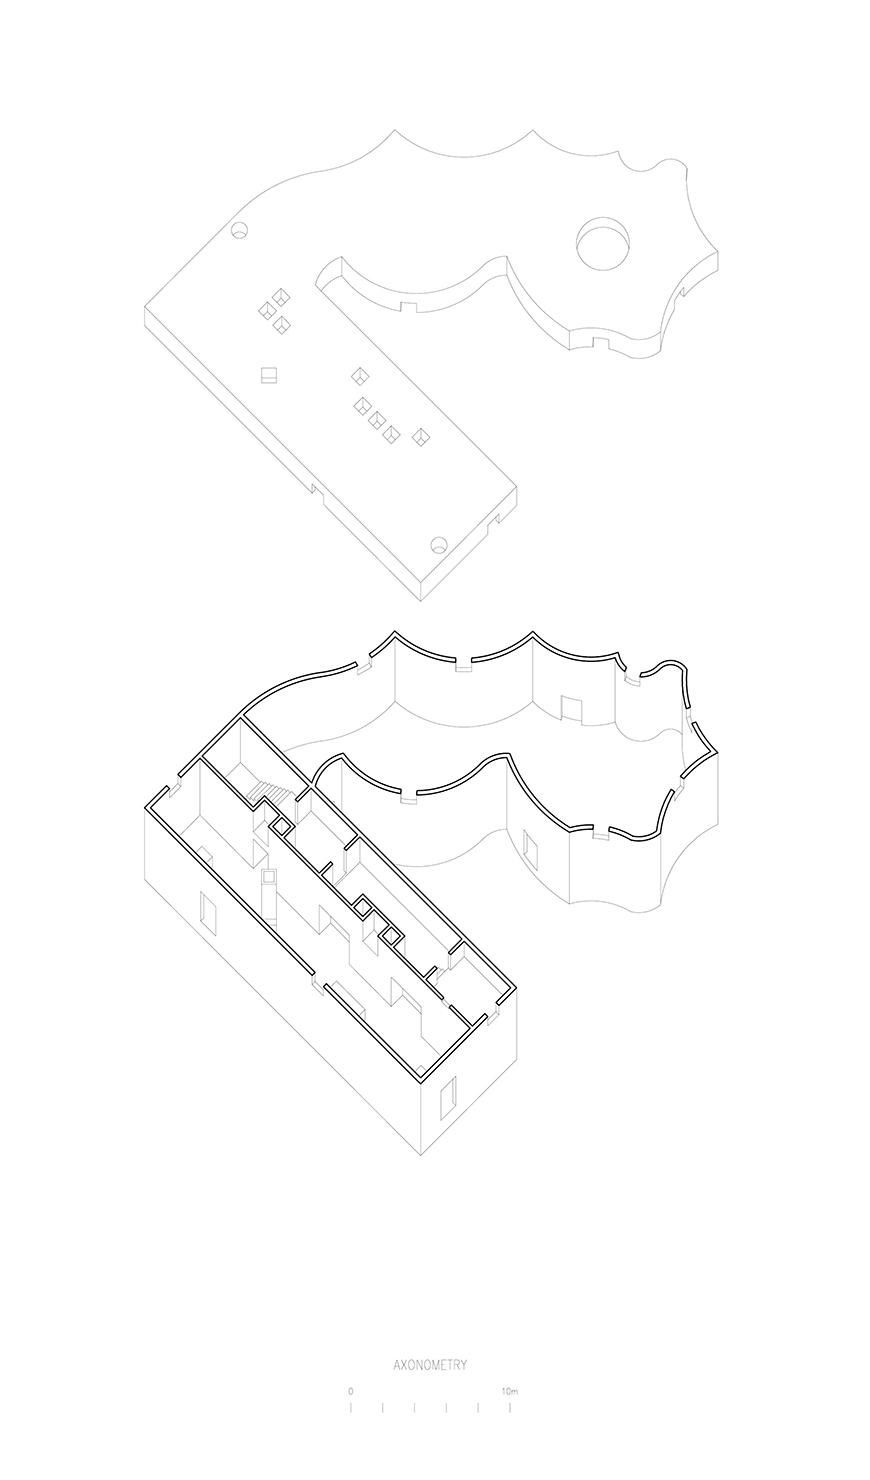 Axonometric without roof showing the interior of the house with one strange form attached to a rectangle. 